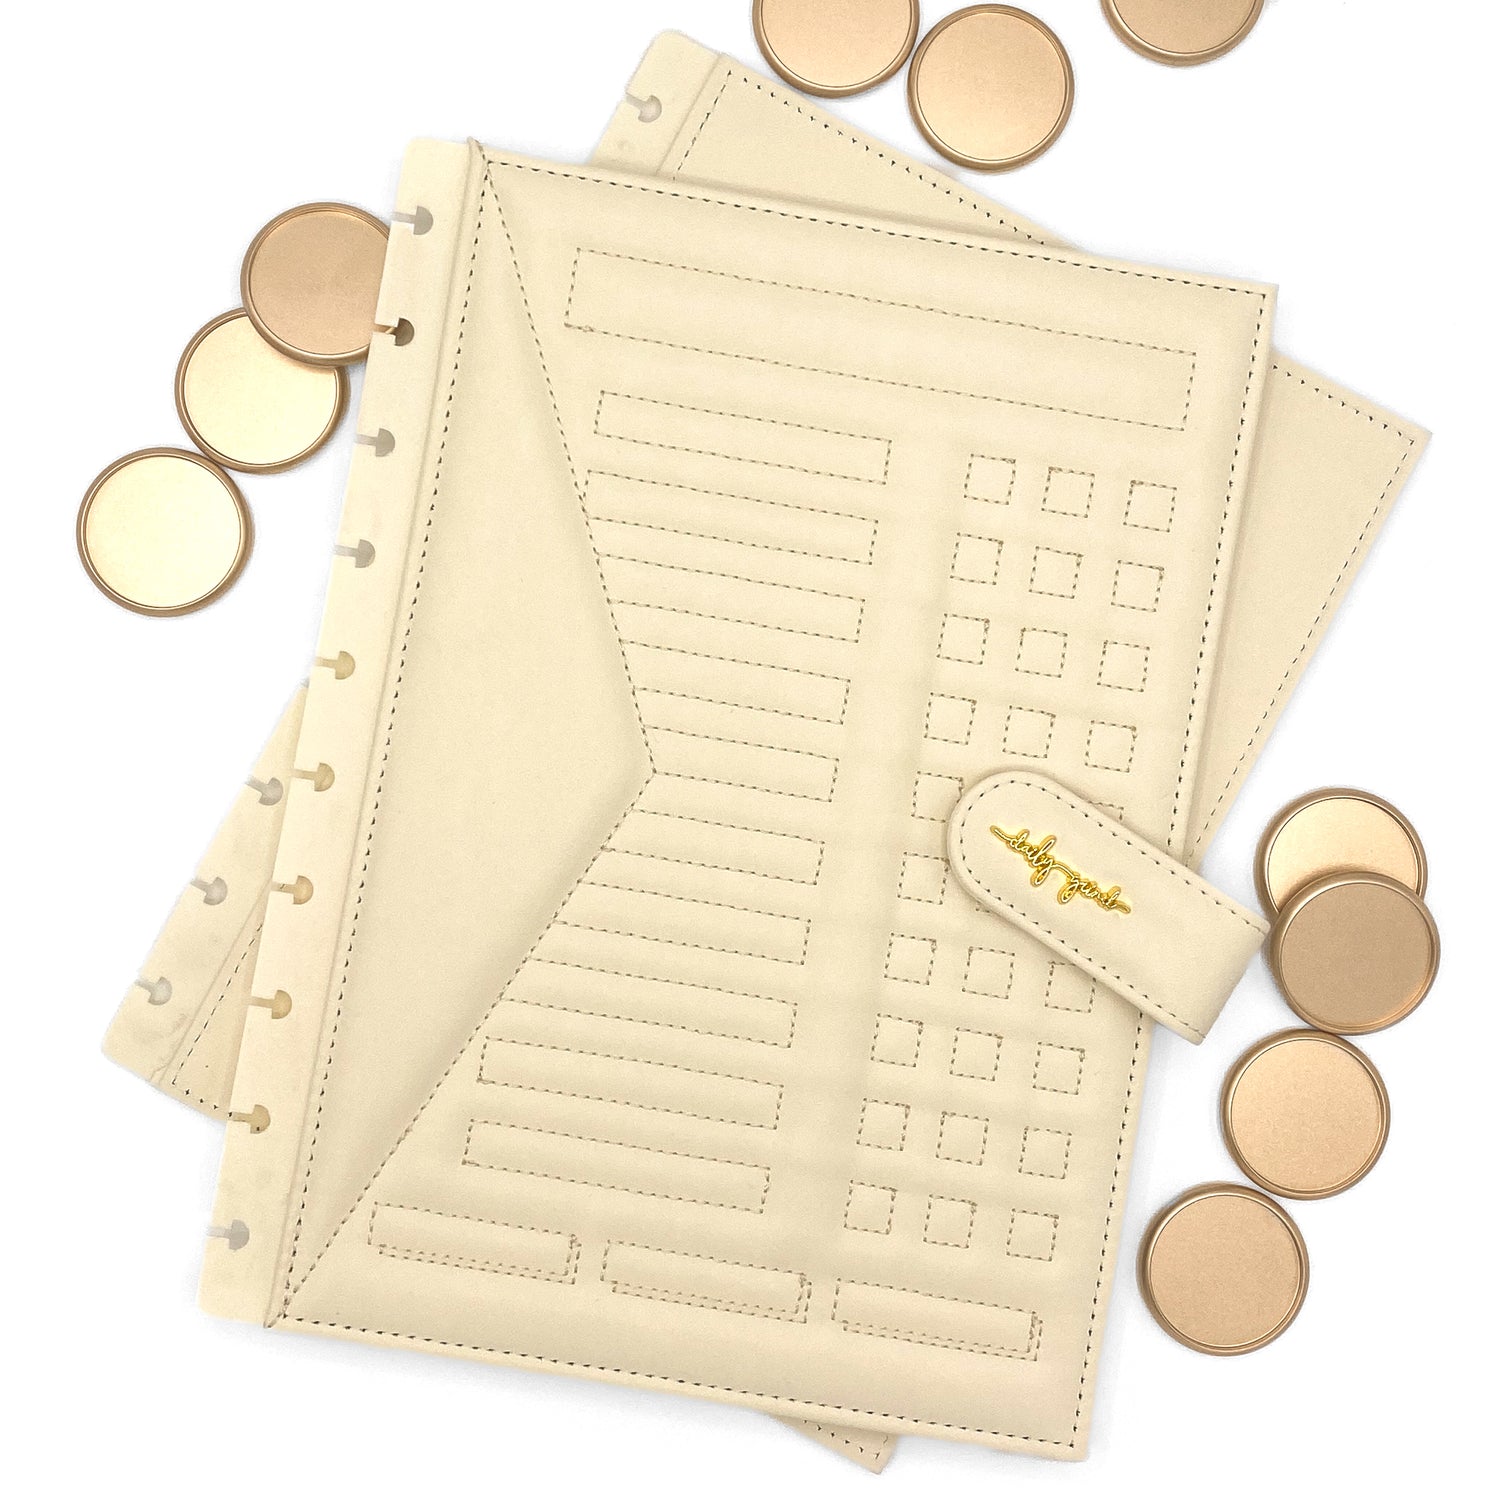 Cream faux leather planner cover and gold discs